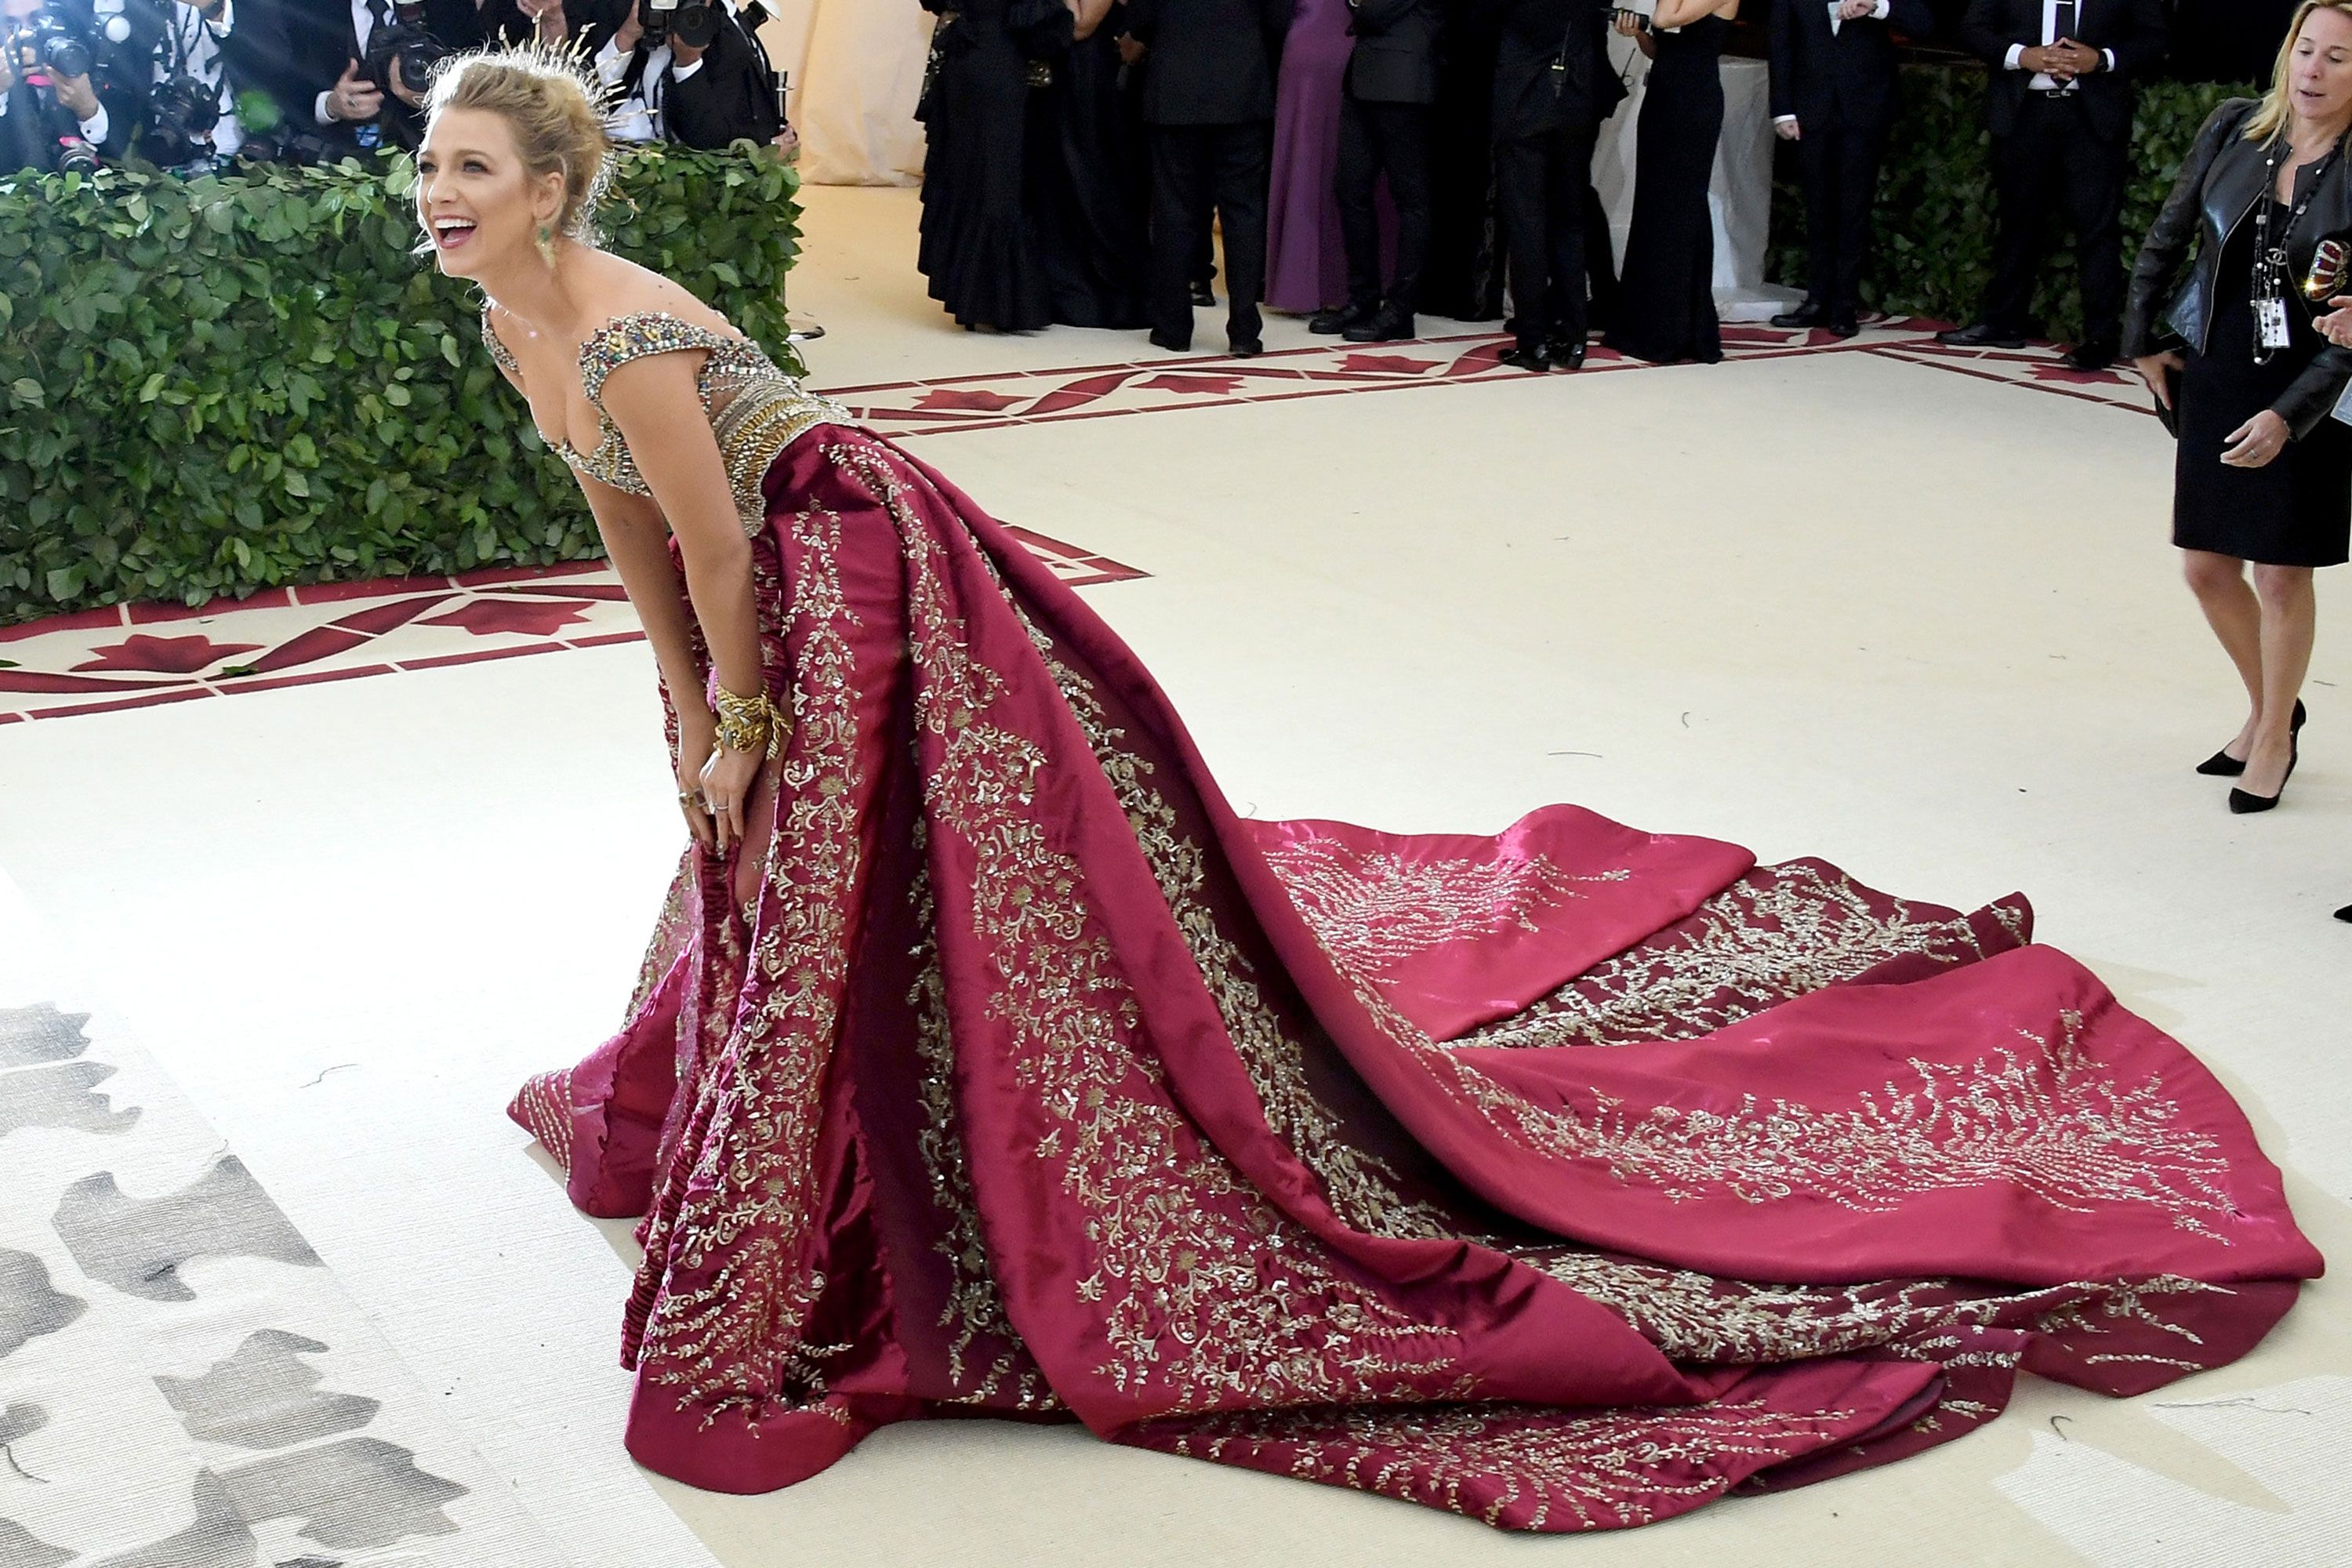 Blake Lively's MET Gala Outfits Through the Years: Photos